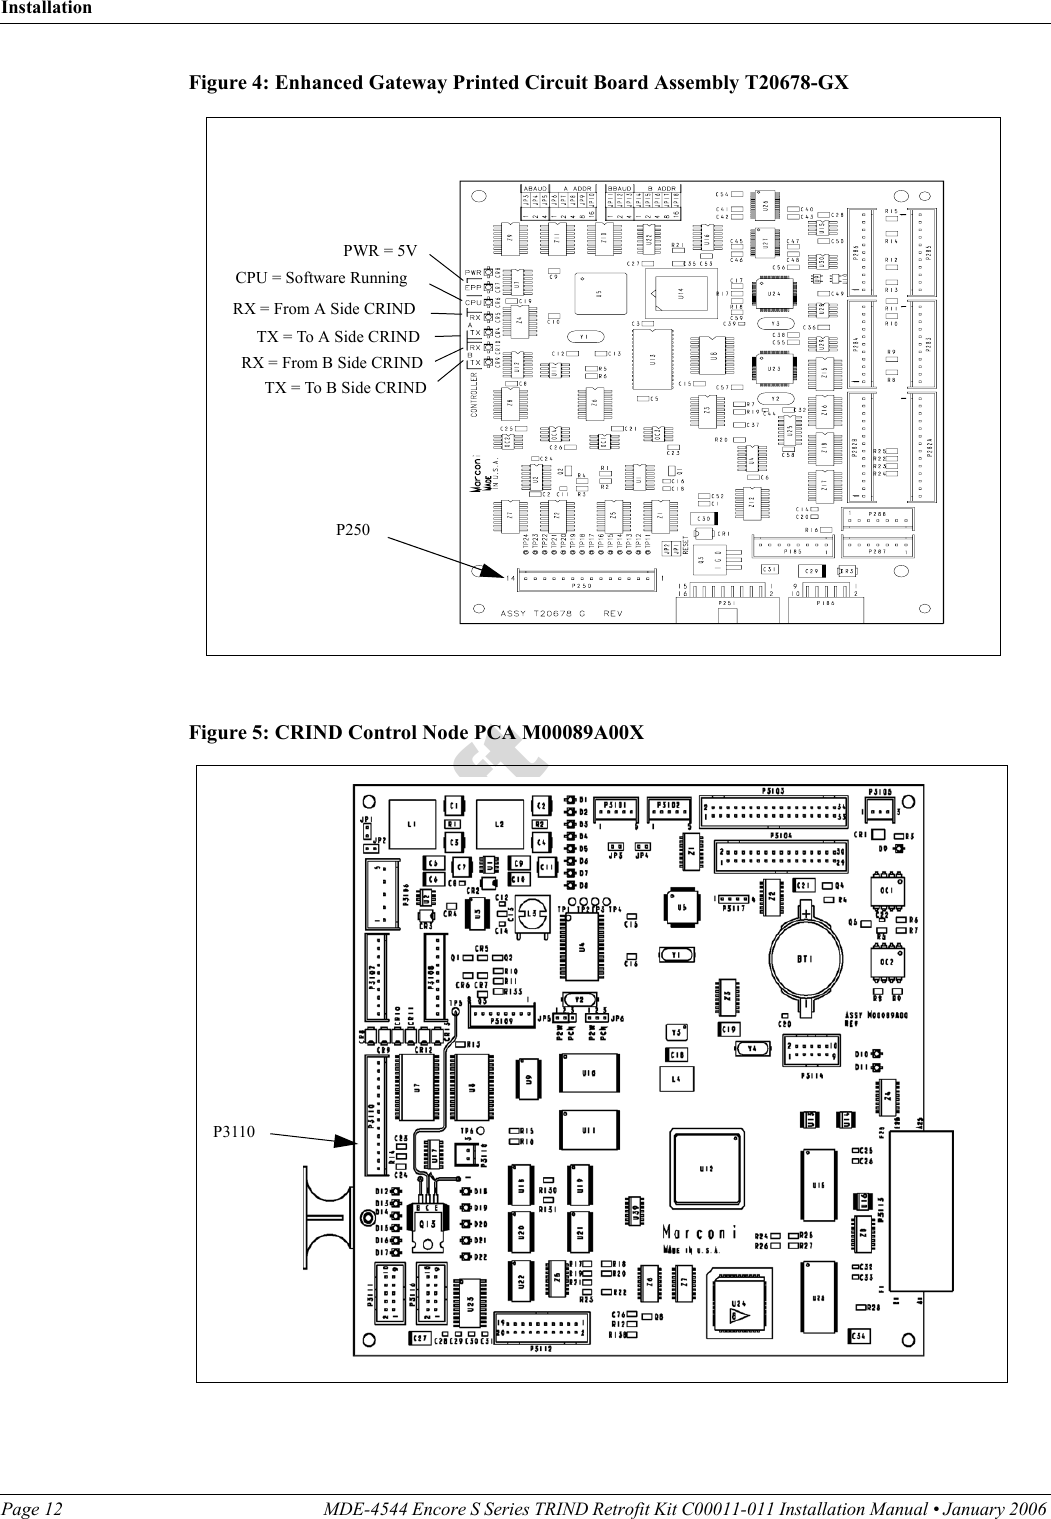 InstallationPage 12 MDE-4544 Encore S Series TRIND Retrofit Kit C00011-011 Installation Manual • January 2006 DraftFigure 4: Enhanced Gateway Printed Circuit Board Assembly T20678-GX CPU = Software RunningPWR = 5VRX = From A Side CRINDTX = To A Side CRINDRX = From B Side CRINDTX = To B Side CRINDP250Figure 5: CRIND Control Node PCA M00089A00XP3110